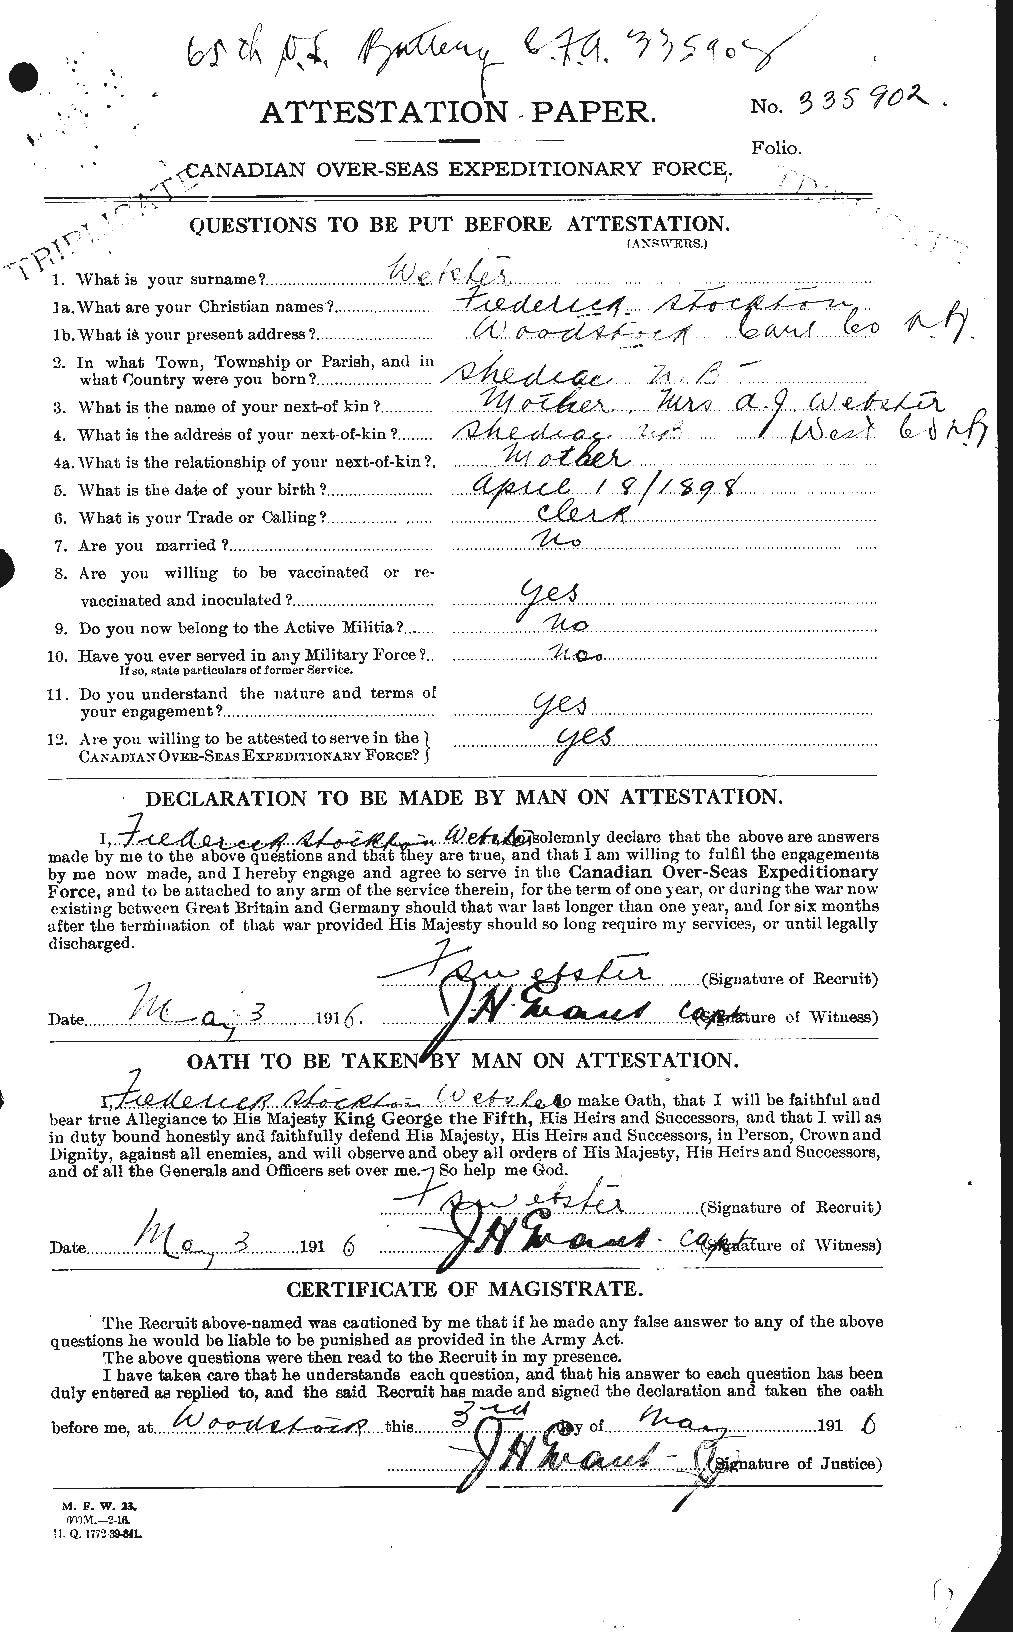 Personnel Records of the First World War - CEF 670369a